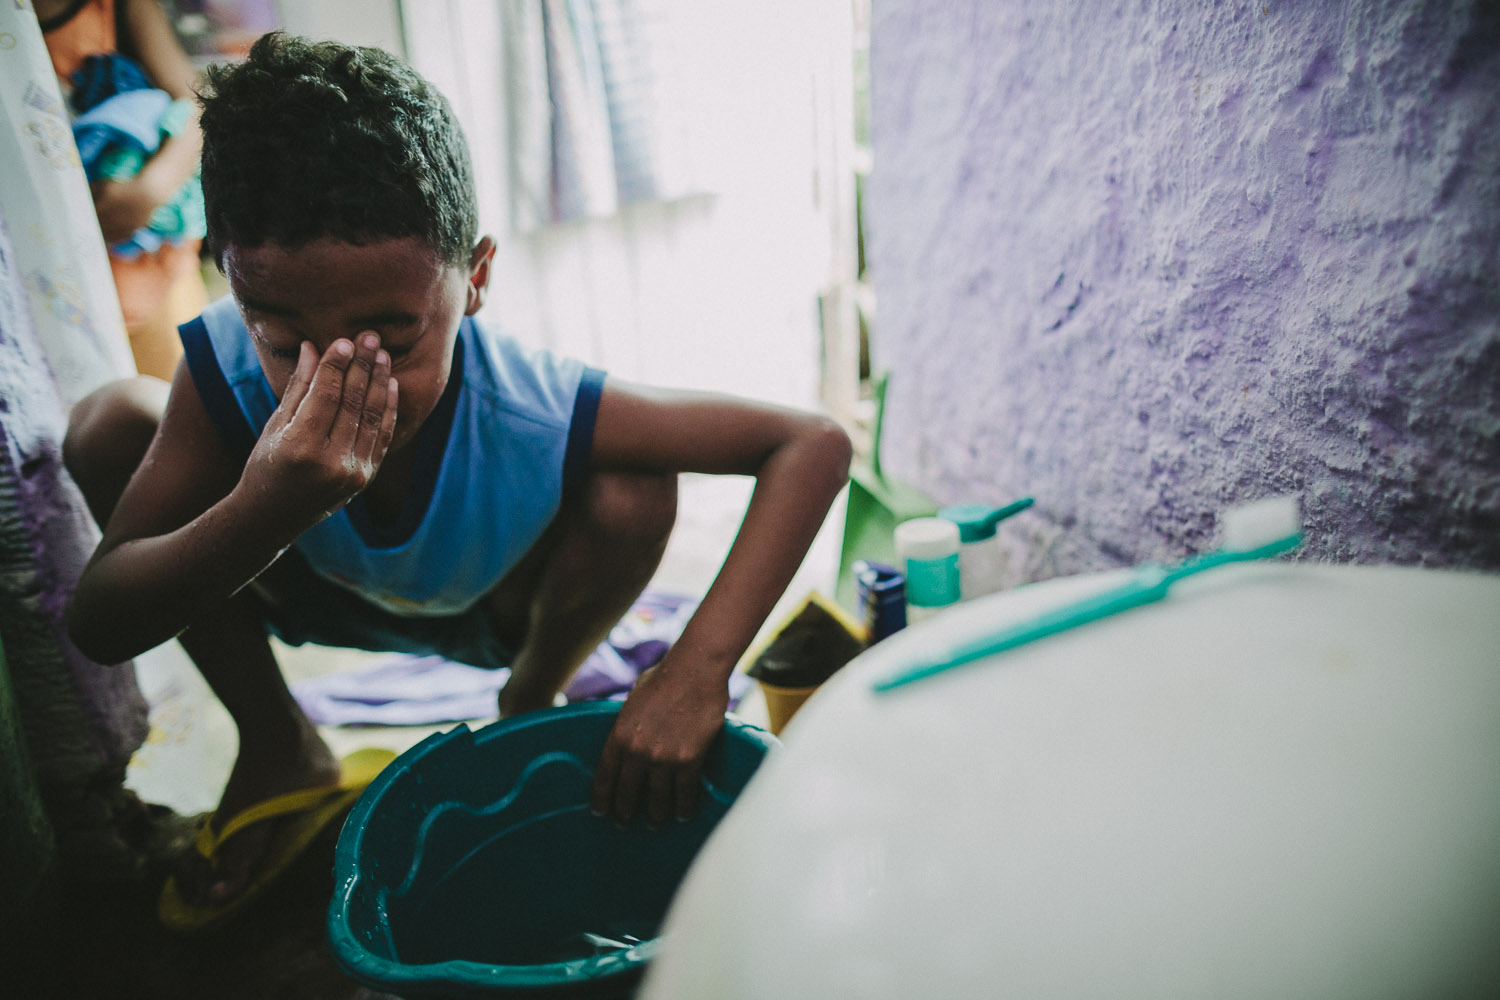   The space where Emidio washes his face in the morning is the same space where the family does all their bathroom, kitchen, and sleeping activities. Emidio's entire house (housing 4 people---soon to be 5) is perhaps no larger than 8 feet by 10 feet.